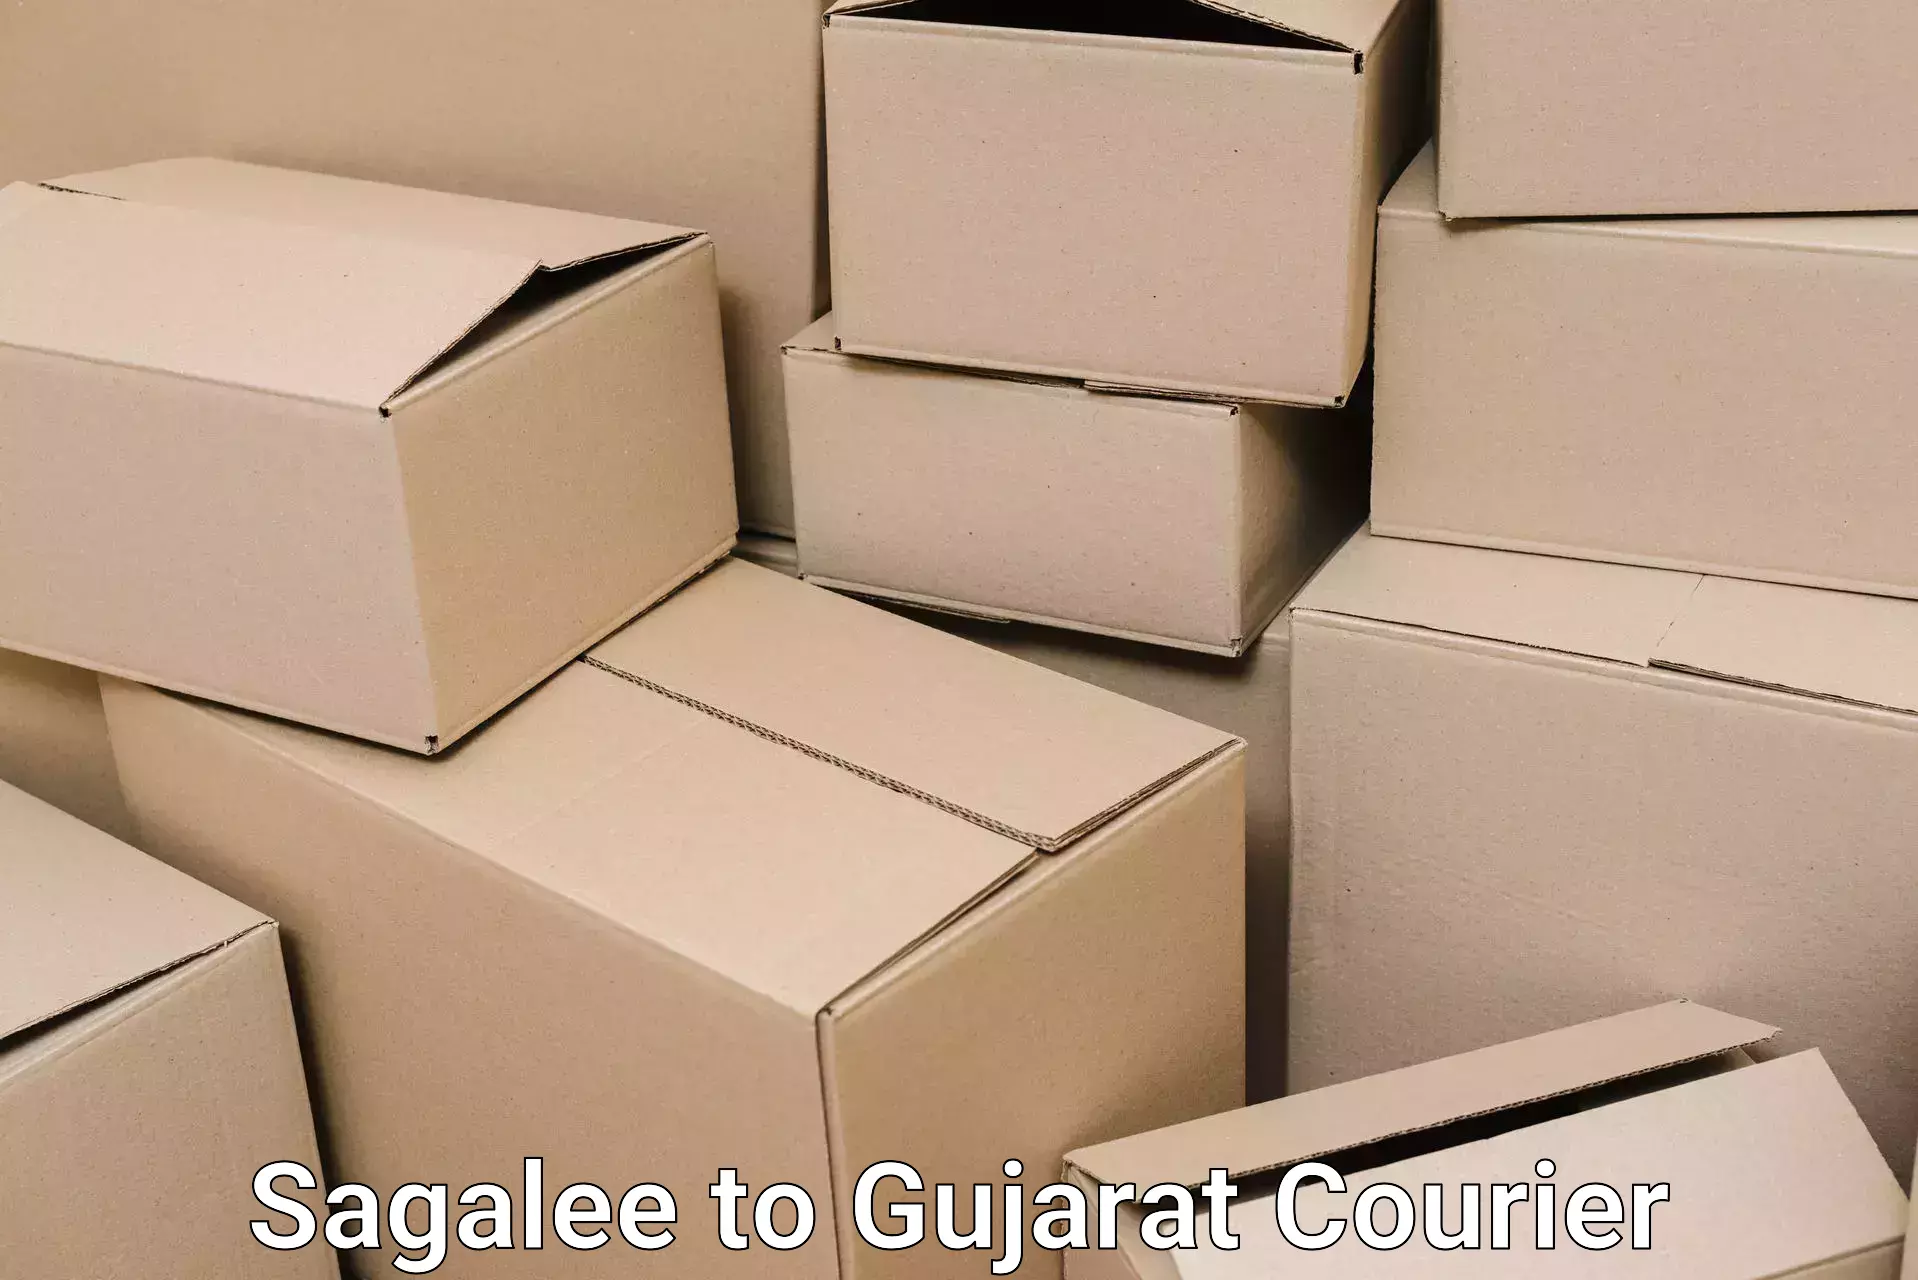 Reliable goods transport in Sagalee to Gujarat